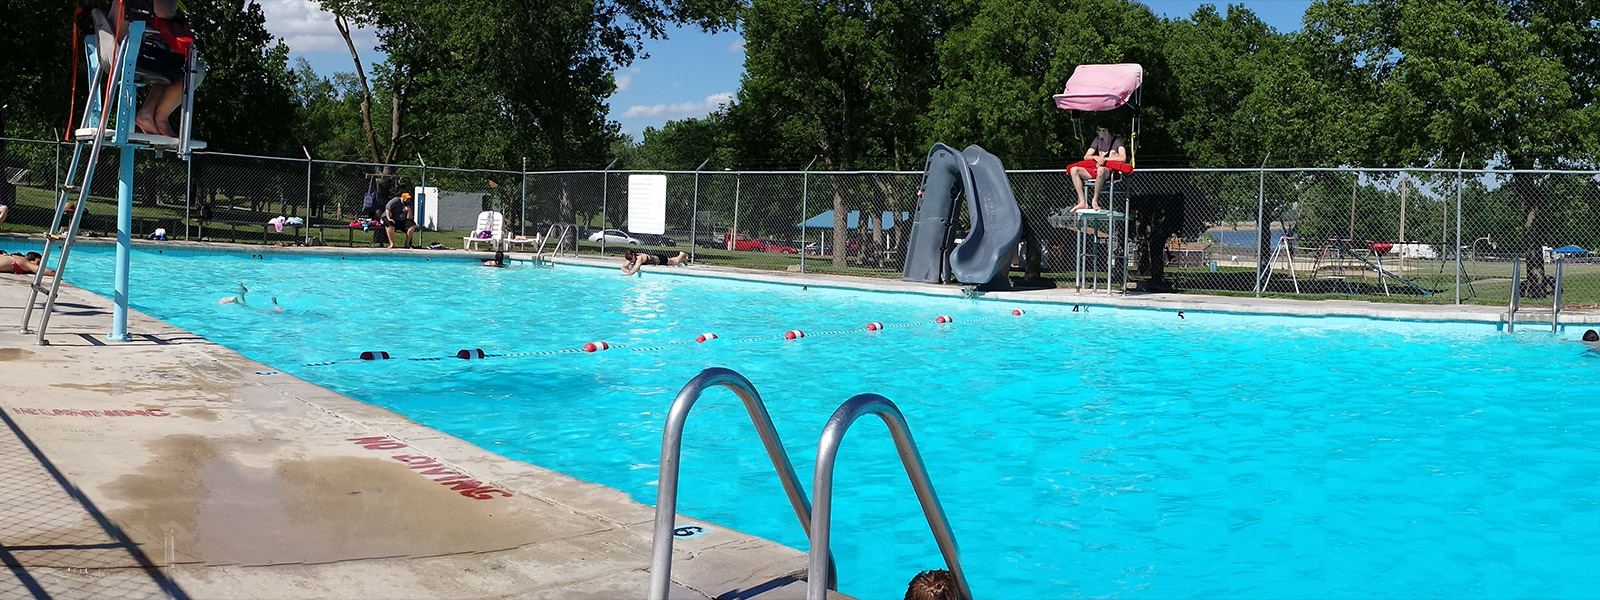 The Wakefield Public Pool